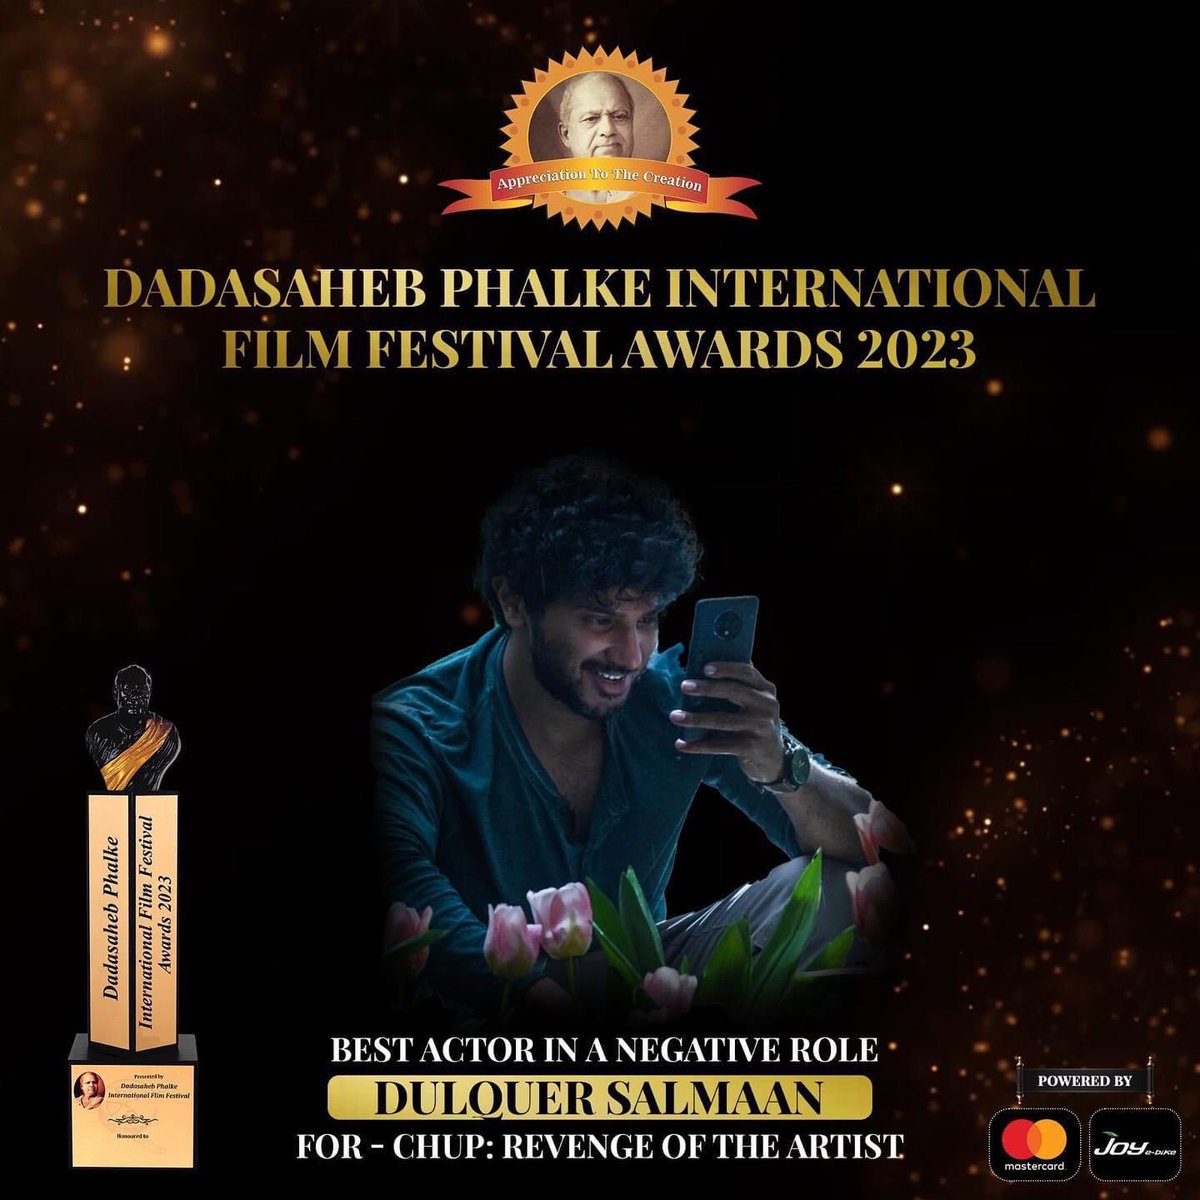 Congratulations to you @dulQuer sir for winning best actor in negative role for #Chup movie at #DadaSahebPhalkeAwards2023 You truly deserve this. Lots of❤️ From Assam .Many more to come🌺 #DulquerSalmaan @DulquerTn @DQsWayfarerFilm #dulquer @DulquerTrends_ @Dulquer_stateFc